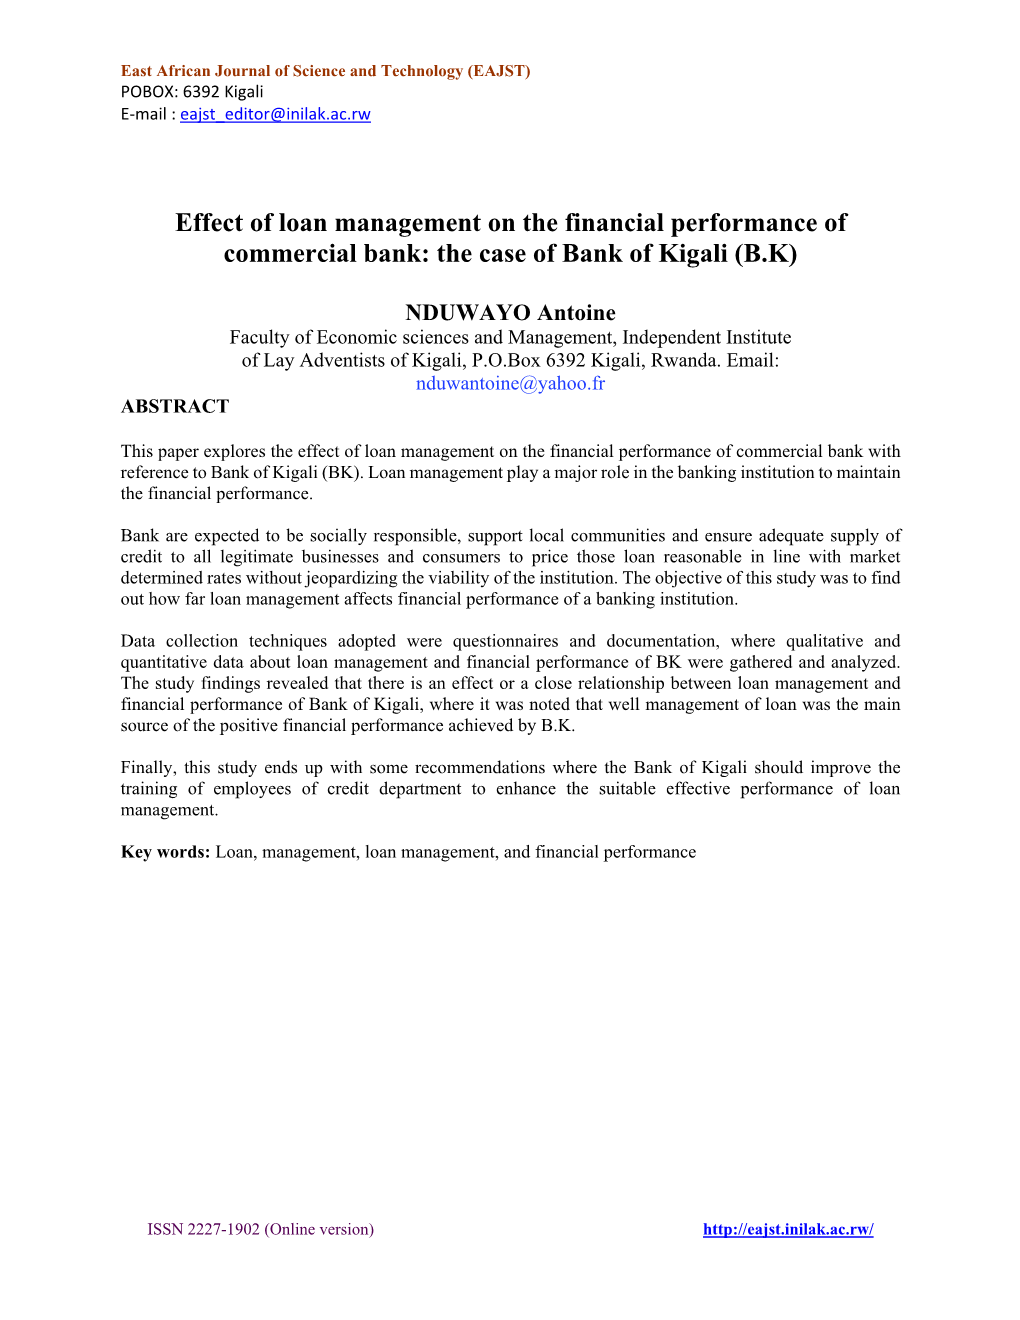 Effect of Loan Management on the Financial Performance of Commercial Bank: the Case of Bank of Kigali (B.K)